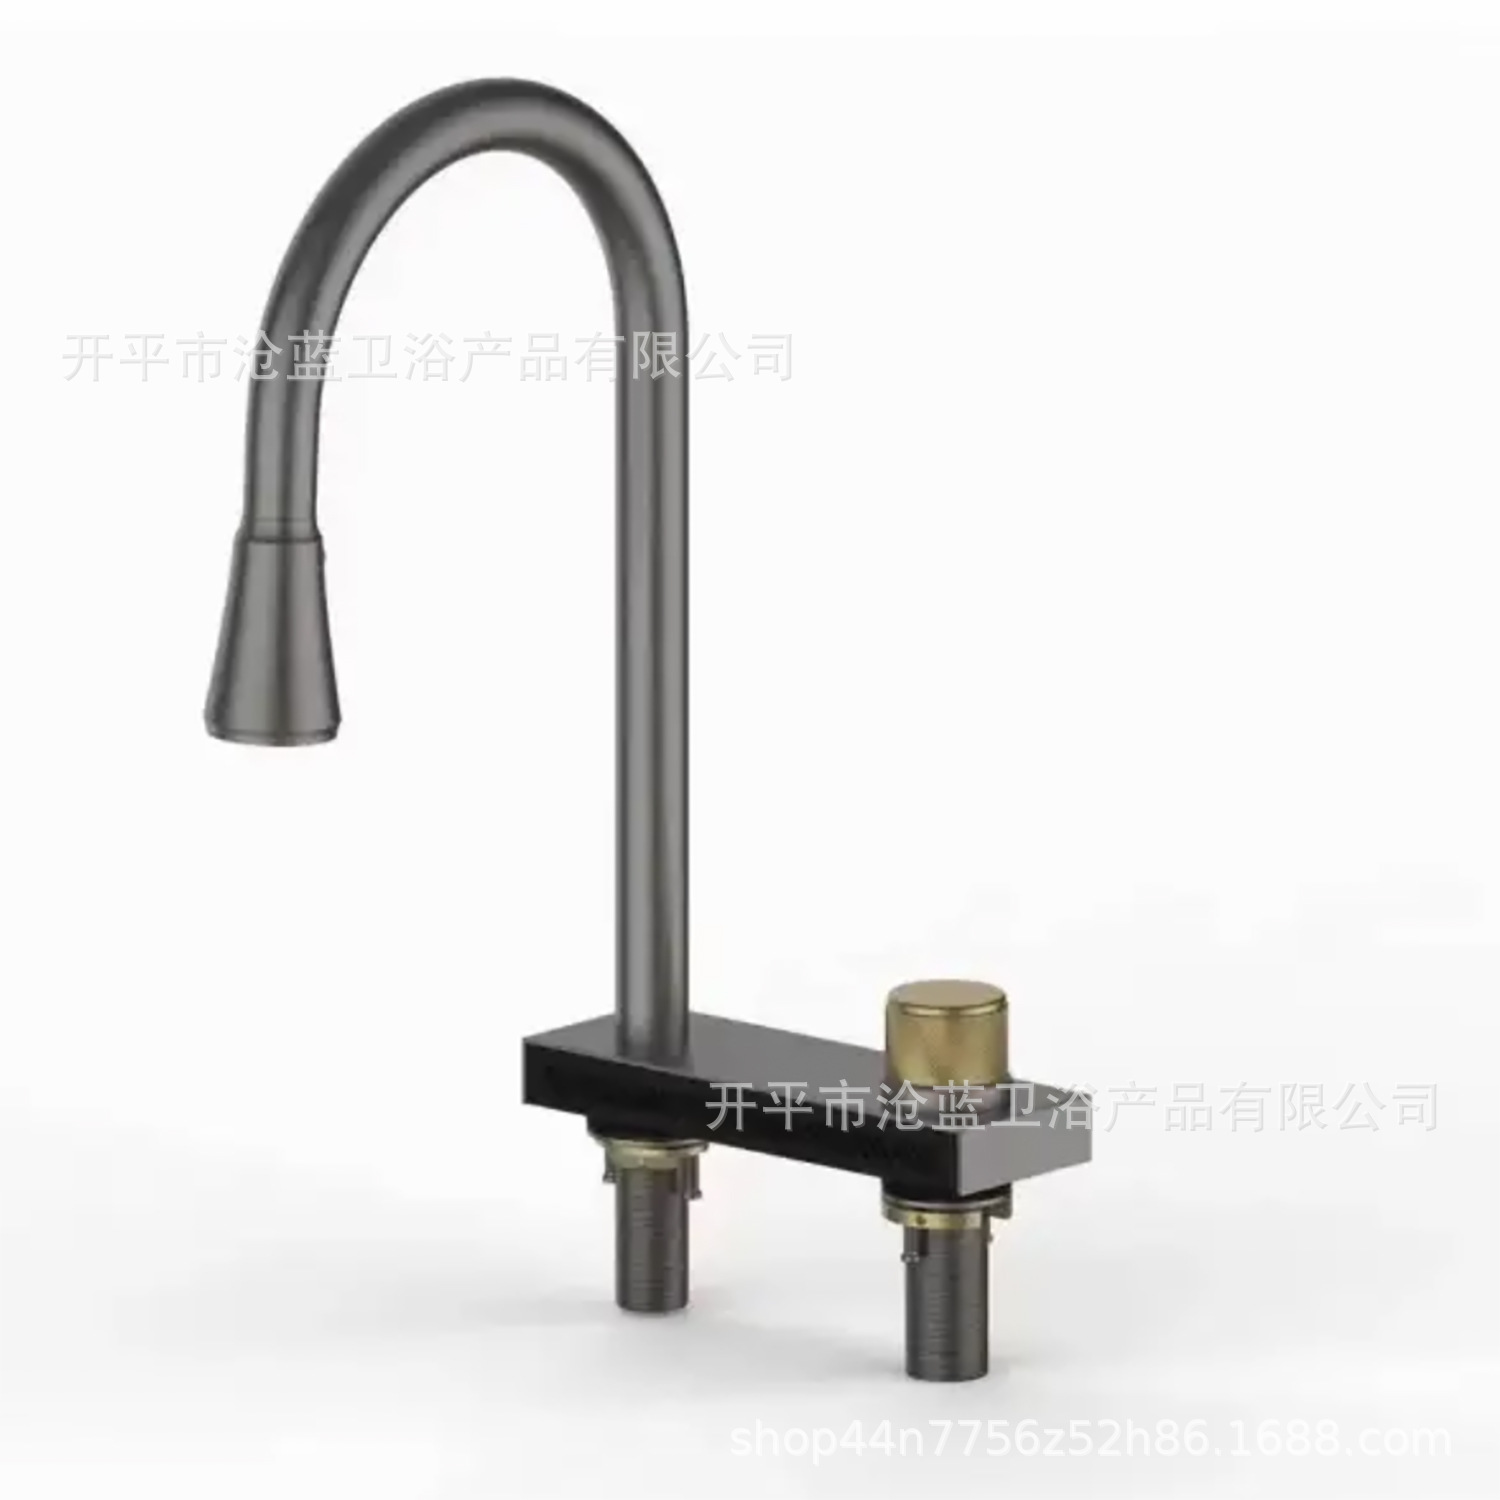 Stainless Steel Pull-out Kitchen Tap Washing Basin Double Hole Flying Rain Faucet Wholesale Flying Rain Sink Faucet